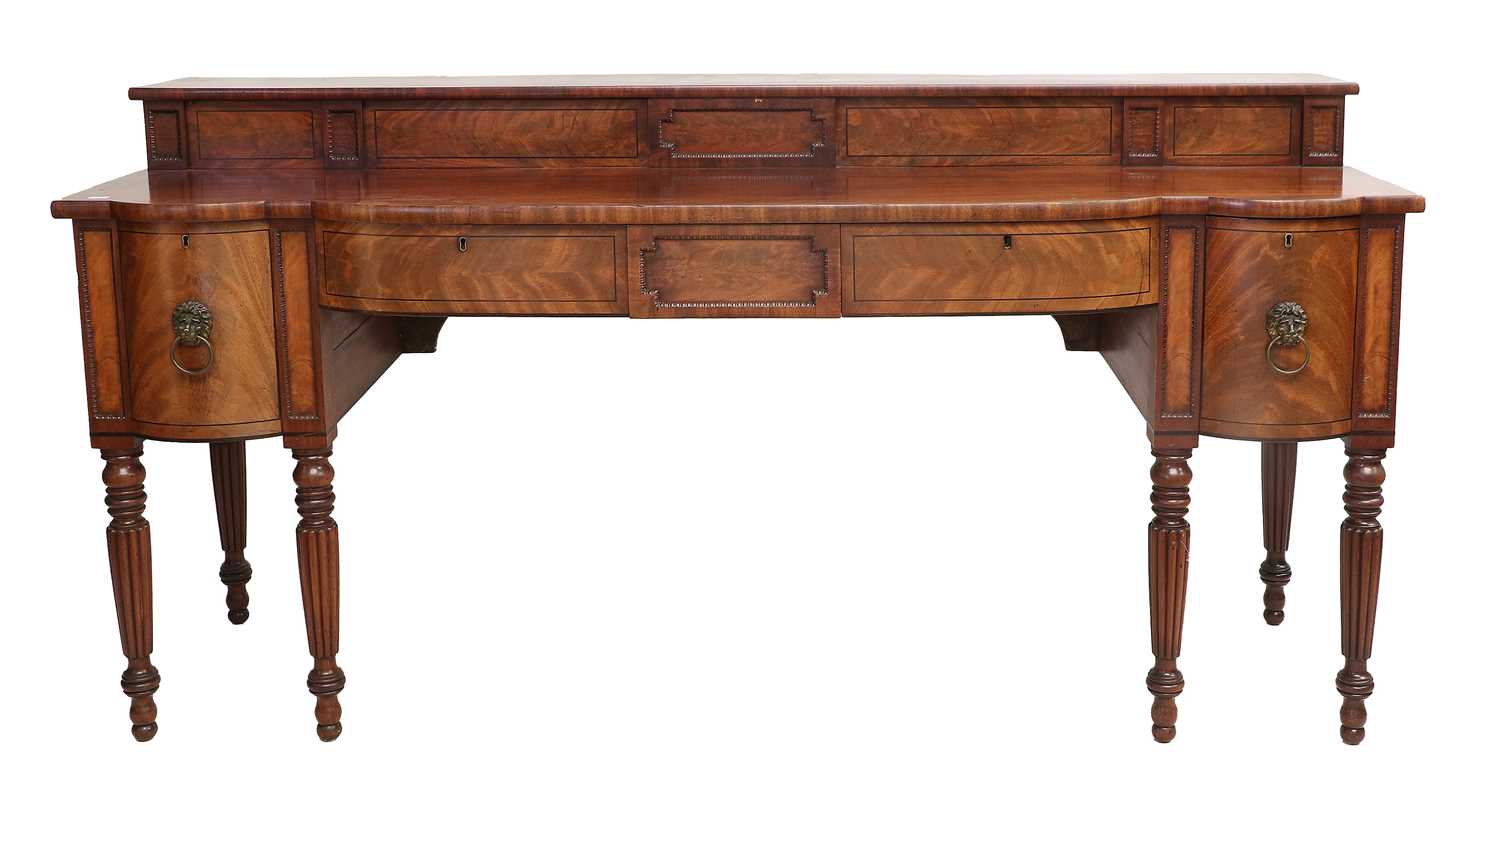 A Regency Mahogany and Ebony-Strung Bowfront Sideboard, in the manner of Gillows, early 19th